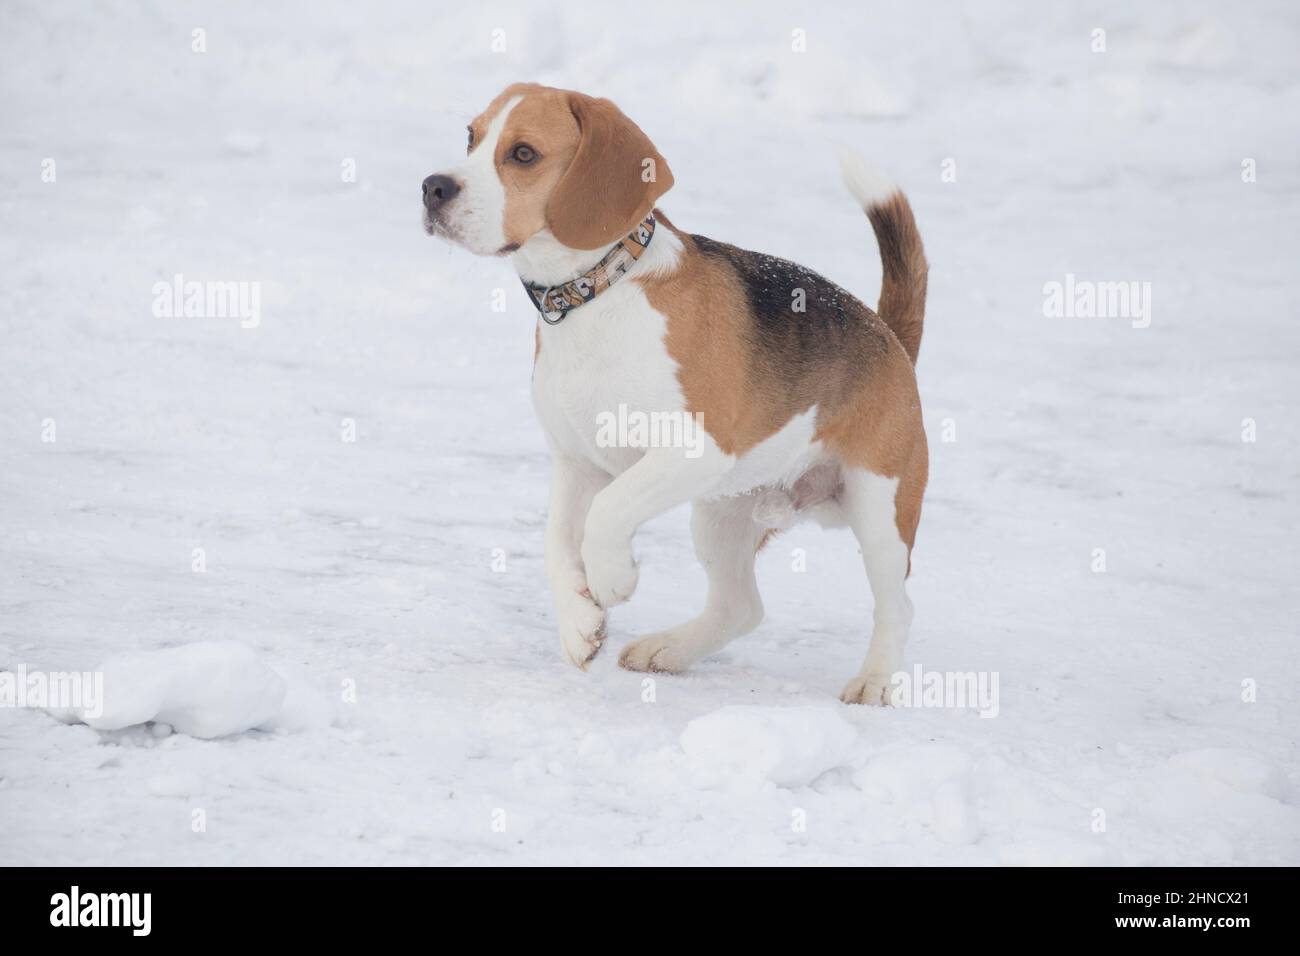 Cute english beagle puppy is standing on a white snow in the winter park. Pet animals. Purebred dog. Stock Photo